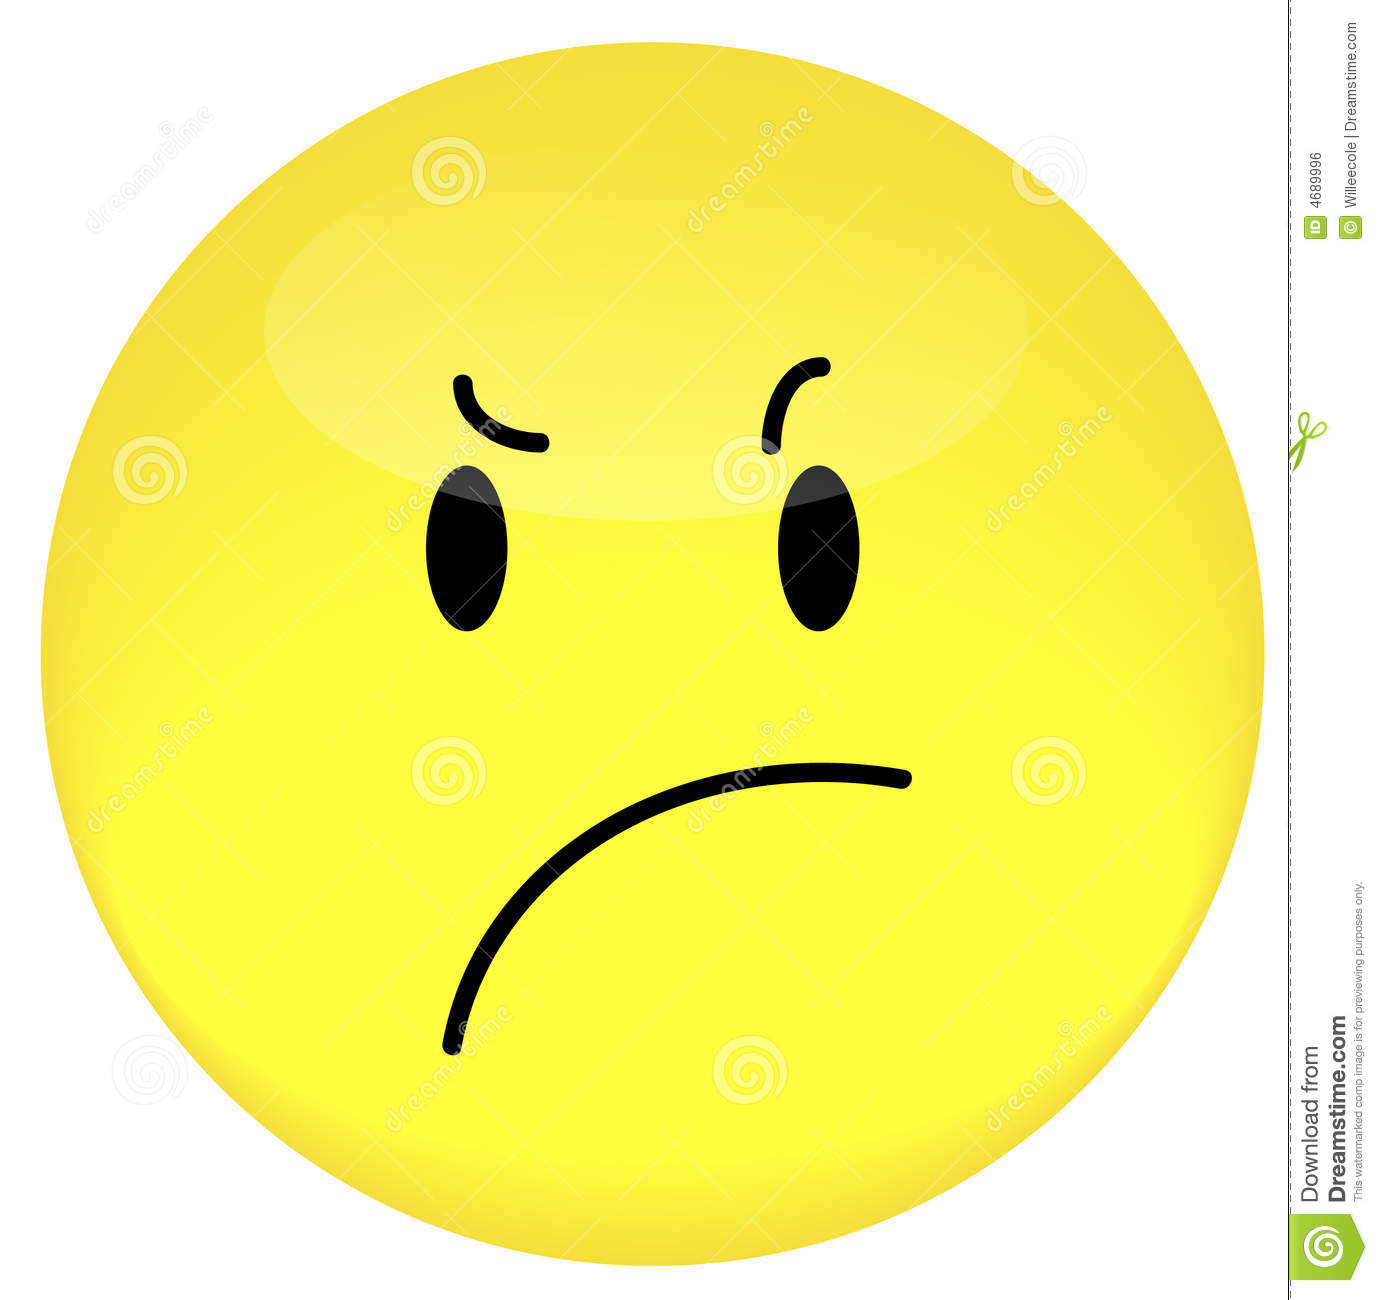 Frustrated Smiley Face Royalty Free Stock Image   Image  4689996